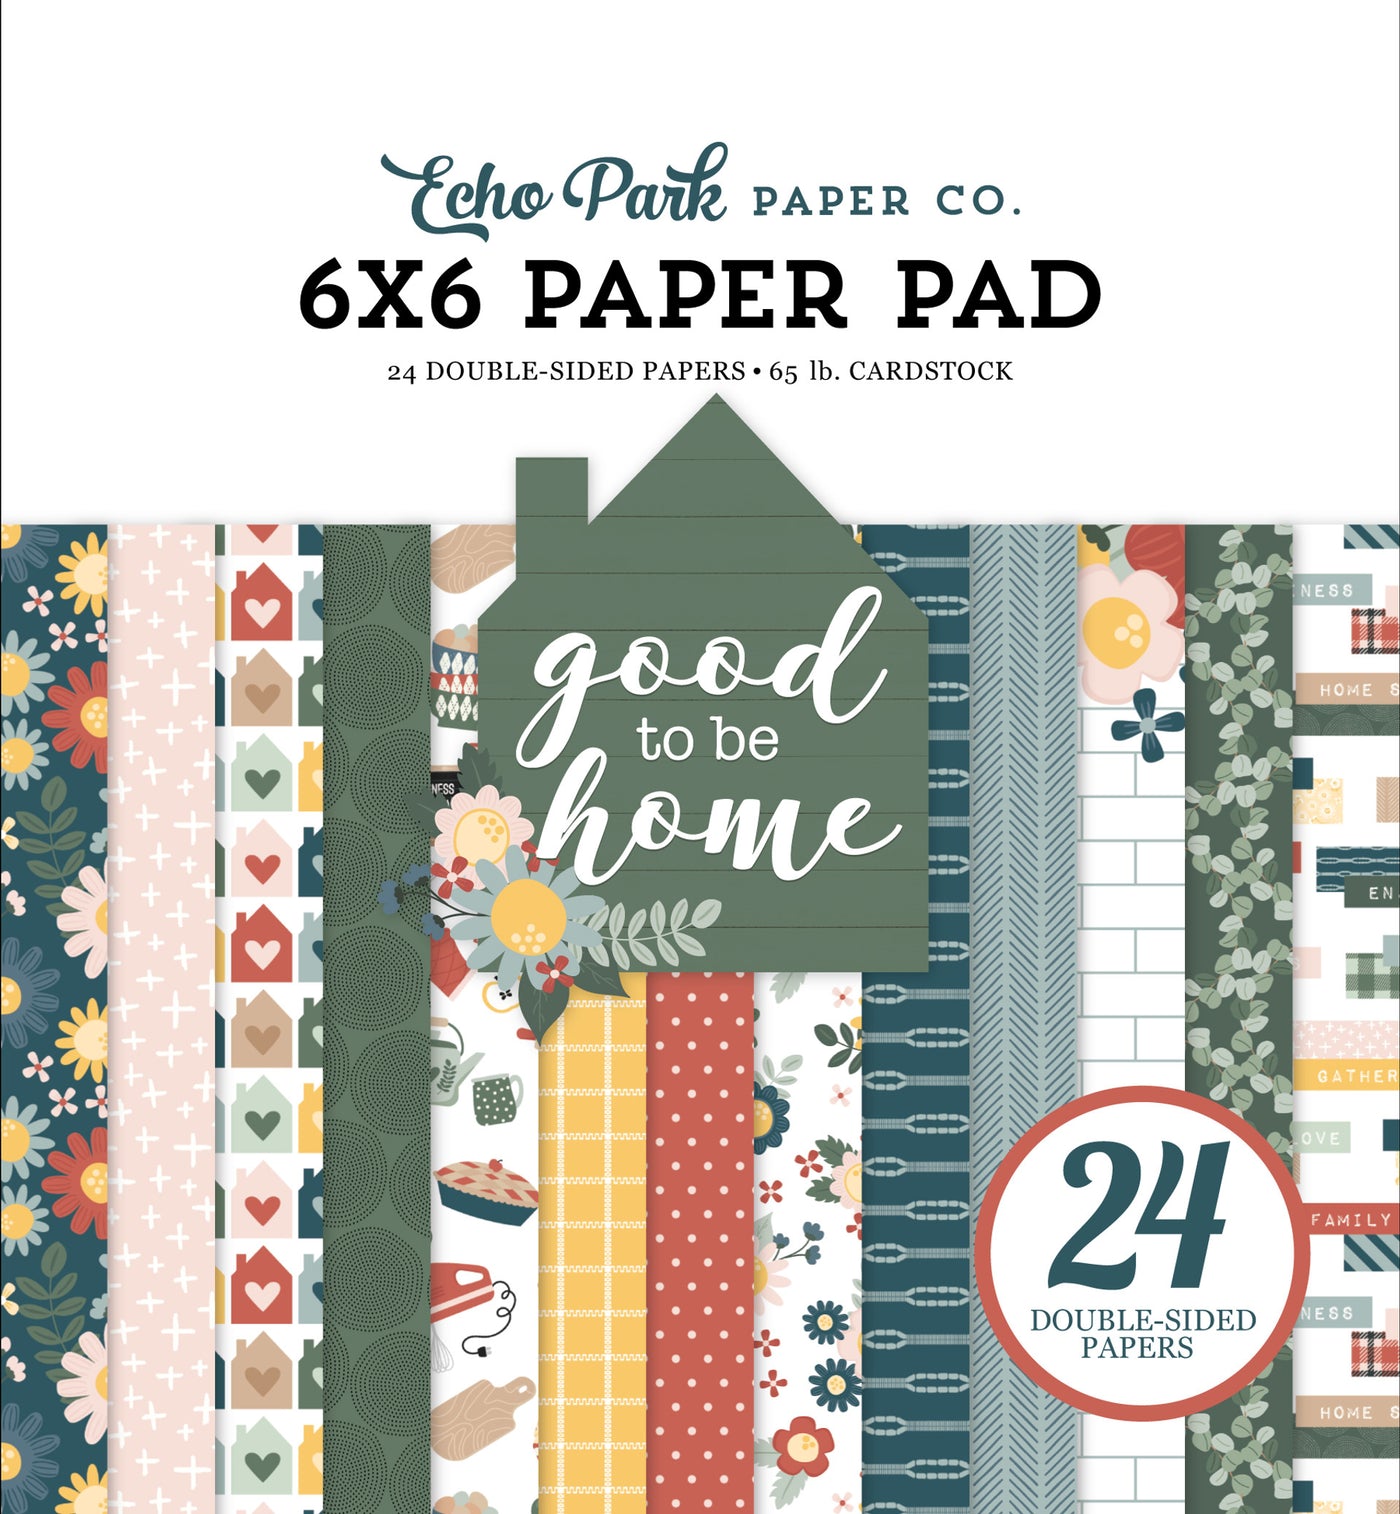 The 6x6 pad features soothing designs and colors, befitting a get-together with friends and family. Fun for cards and papercrafts. Includes 24 double-sided pages.